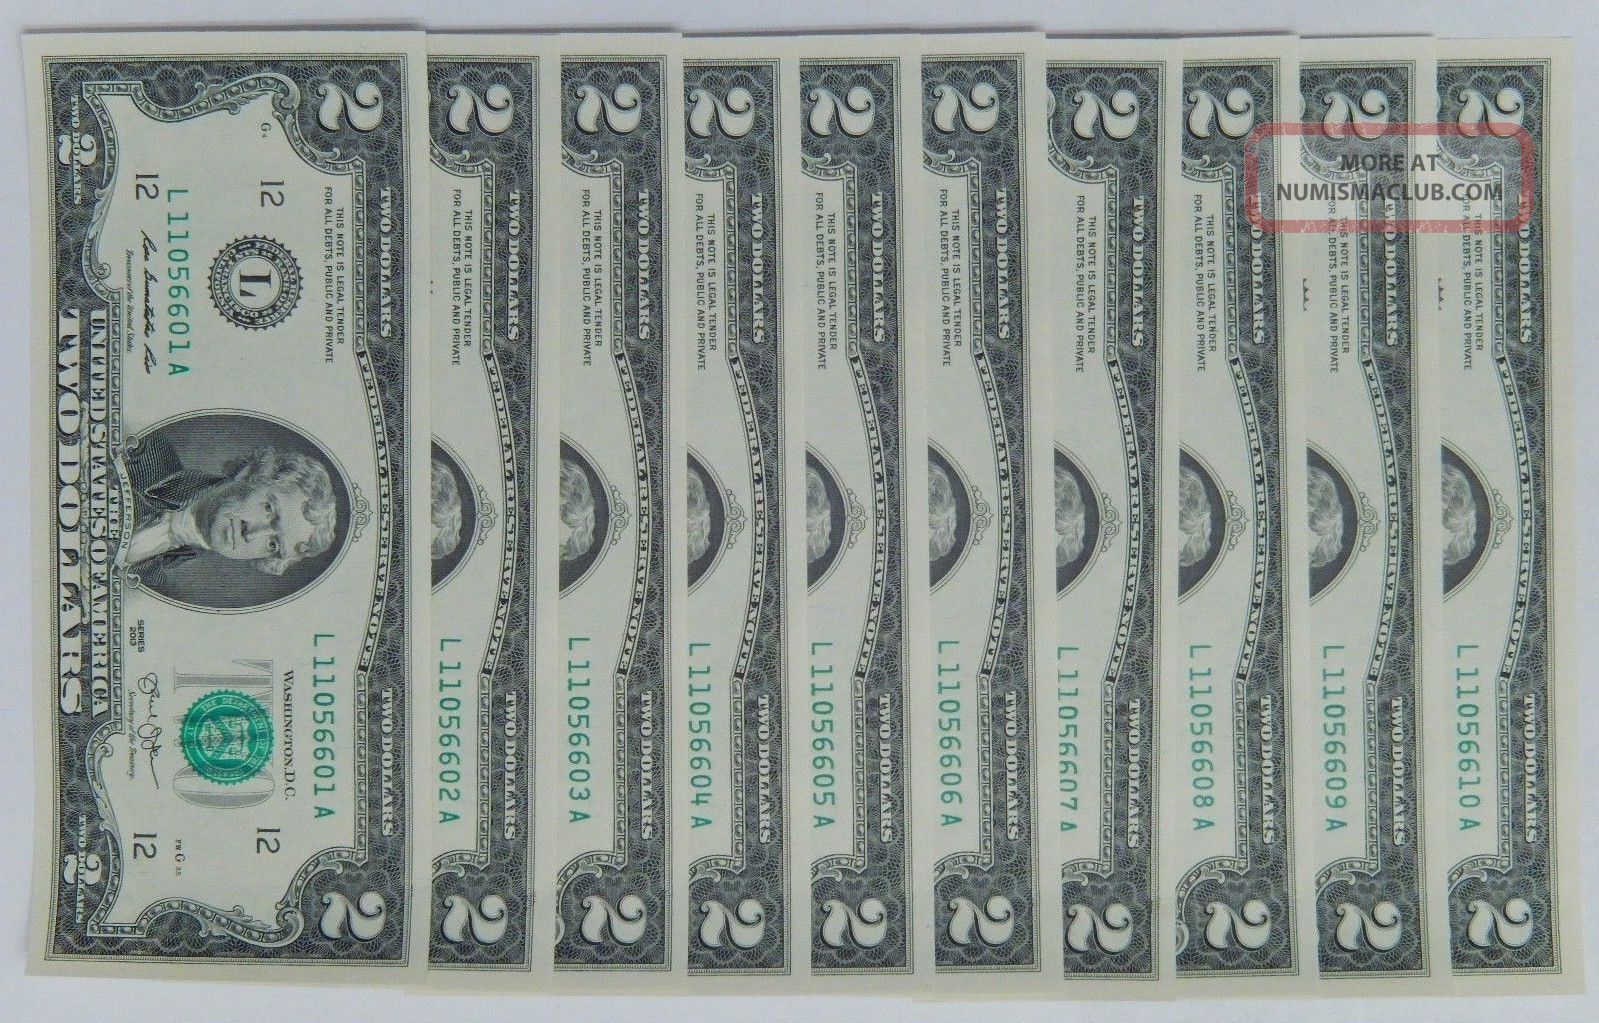 10x $2 Uncirculated Sequential Serial Numbers Two Dollar Bills $20 Fv 2013 Nr 17 Small Size Notes photo